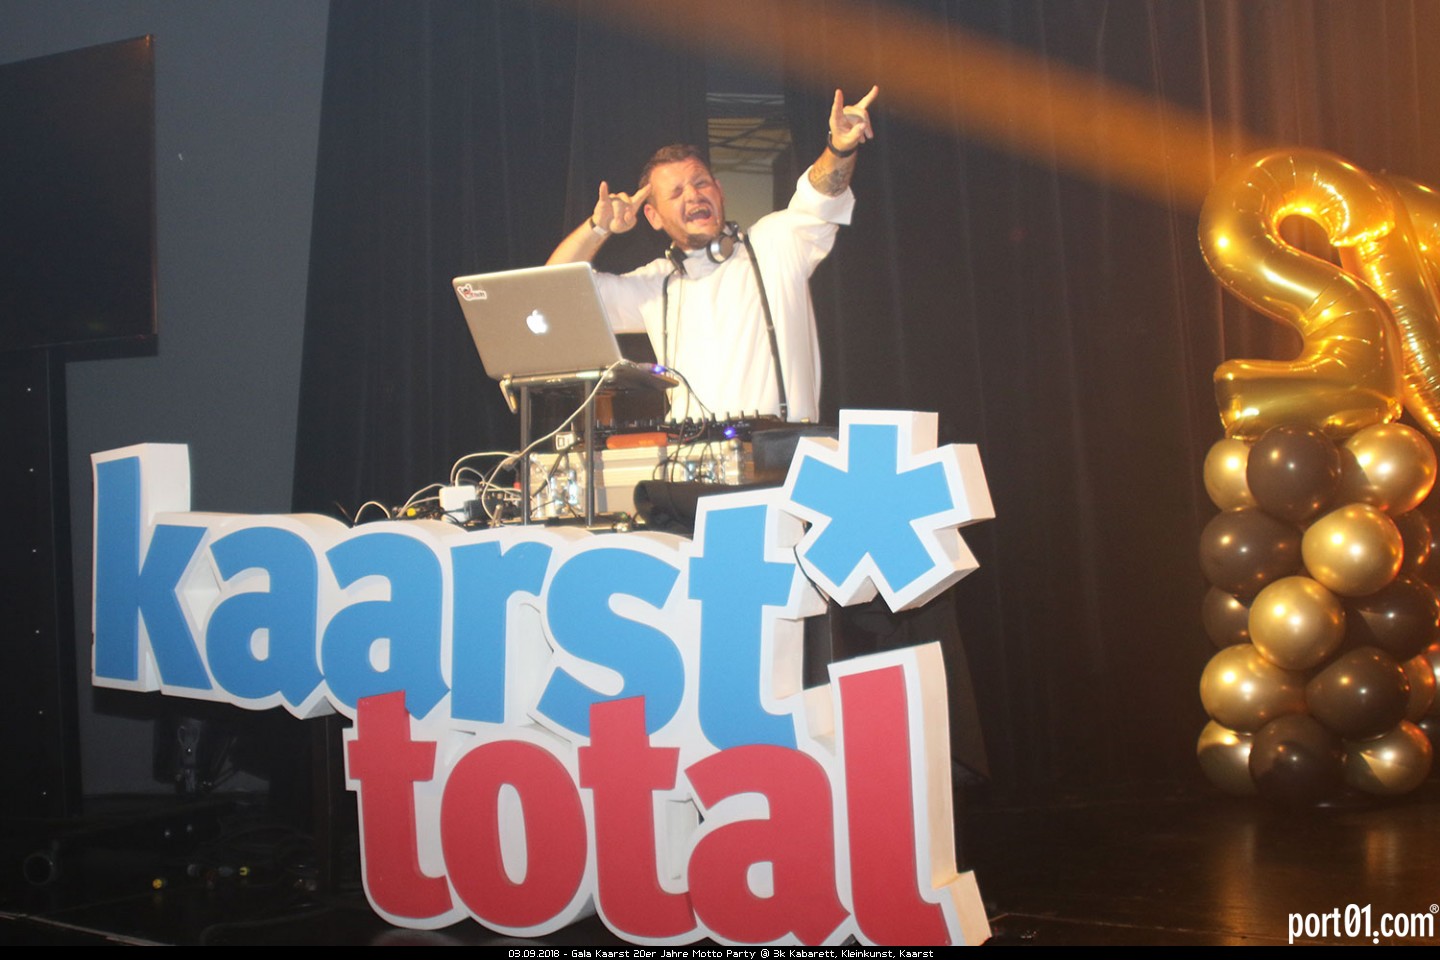 Gala Kaarst 20er Jahre Motto Party